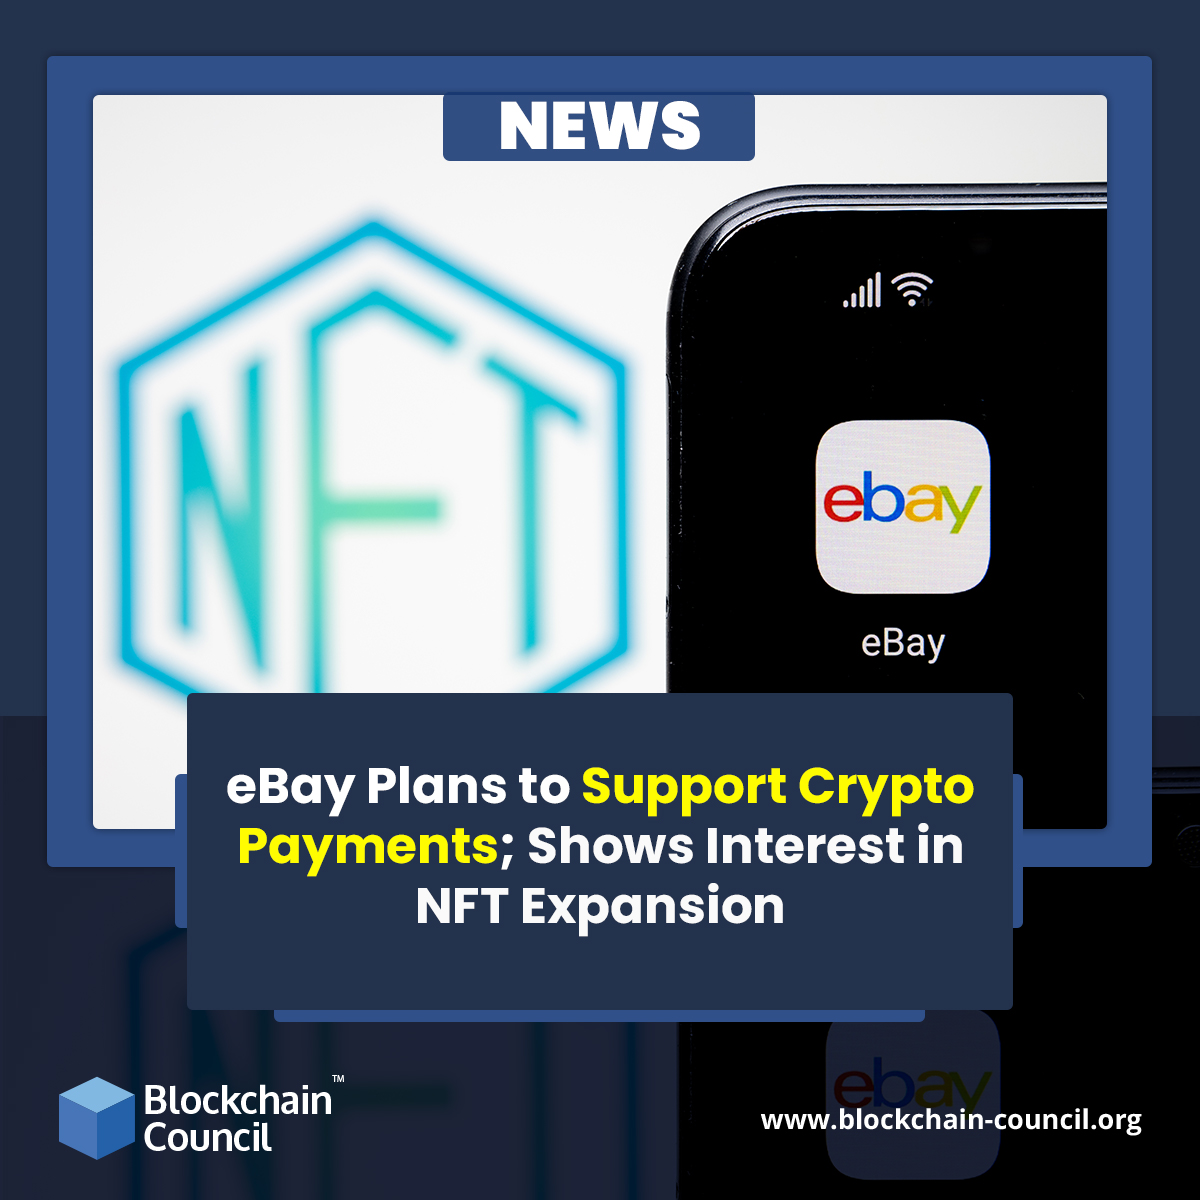 eBay Plans to Support Crypto Payments; Shows Interest in NFT Expansion